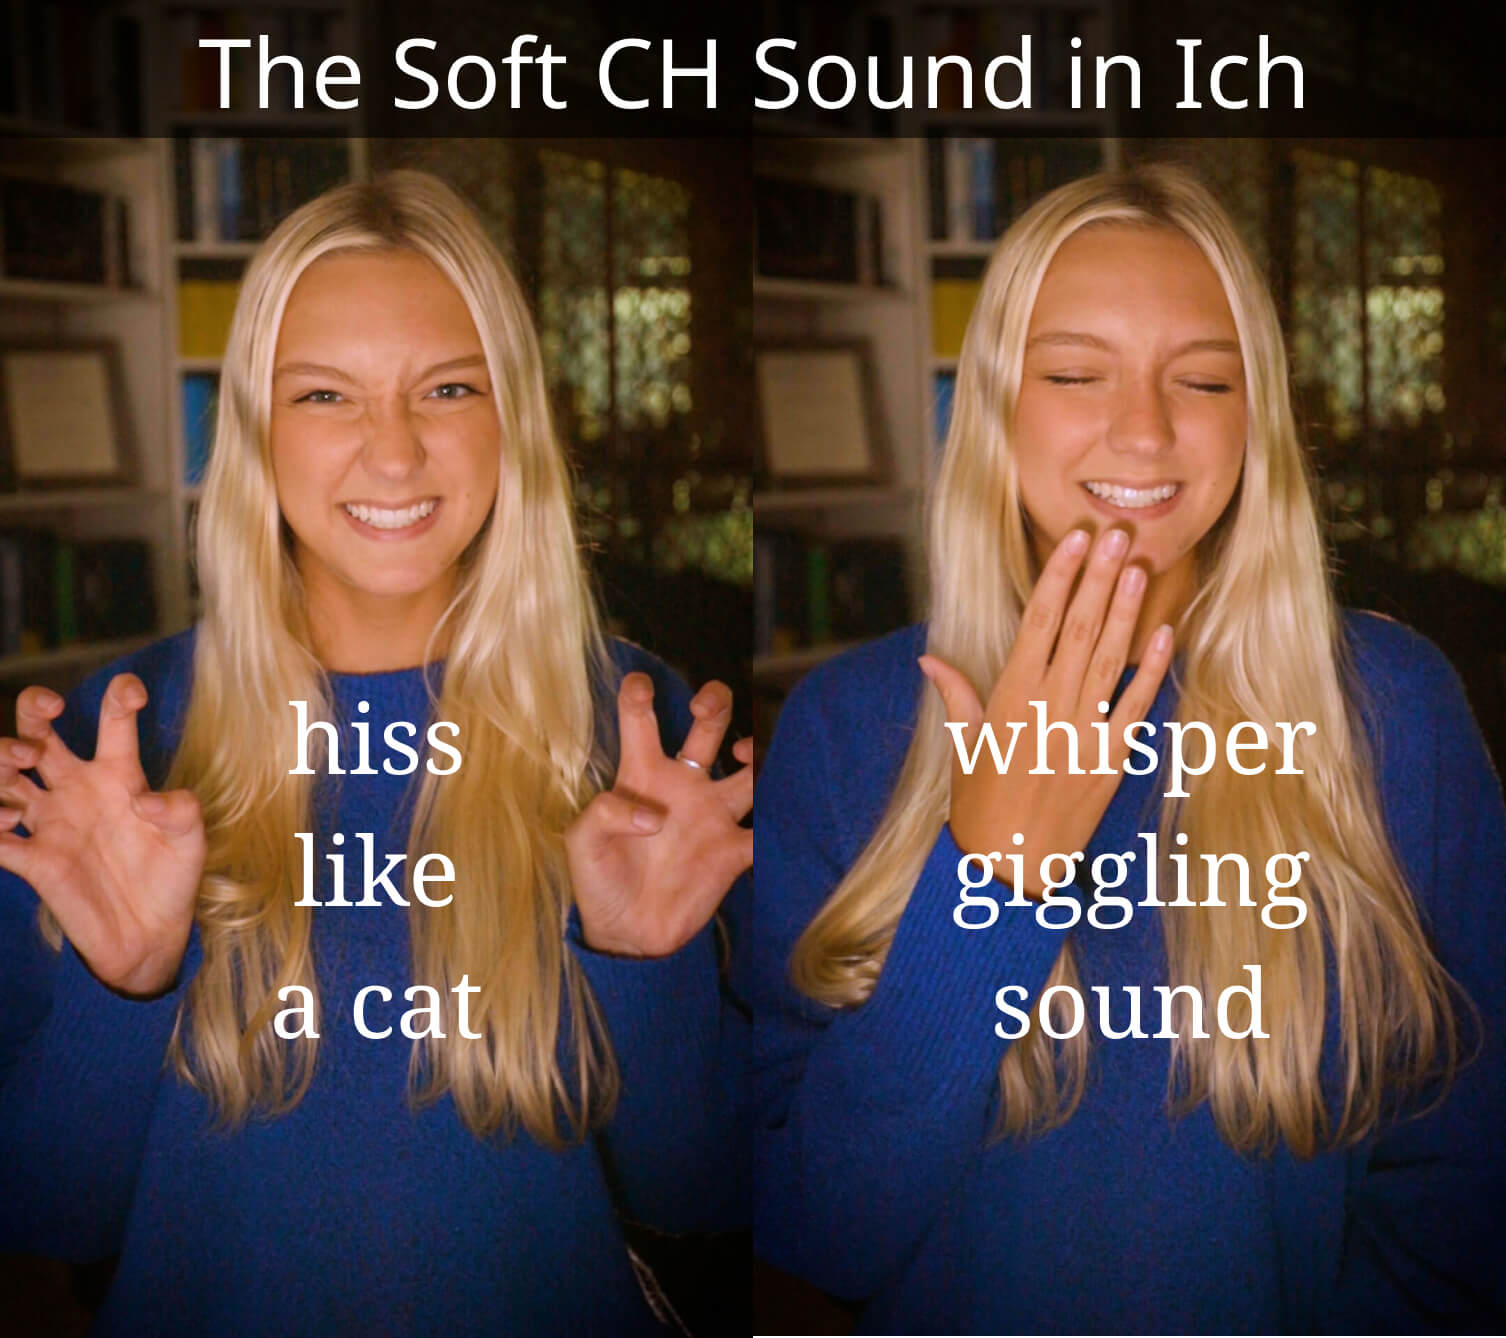 Woman pretending to hiss like a cat and whisper a giggle, showing practice tips for the soft pronunciation of German CH, which is present in the word ich.